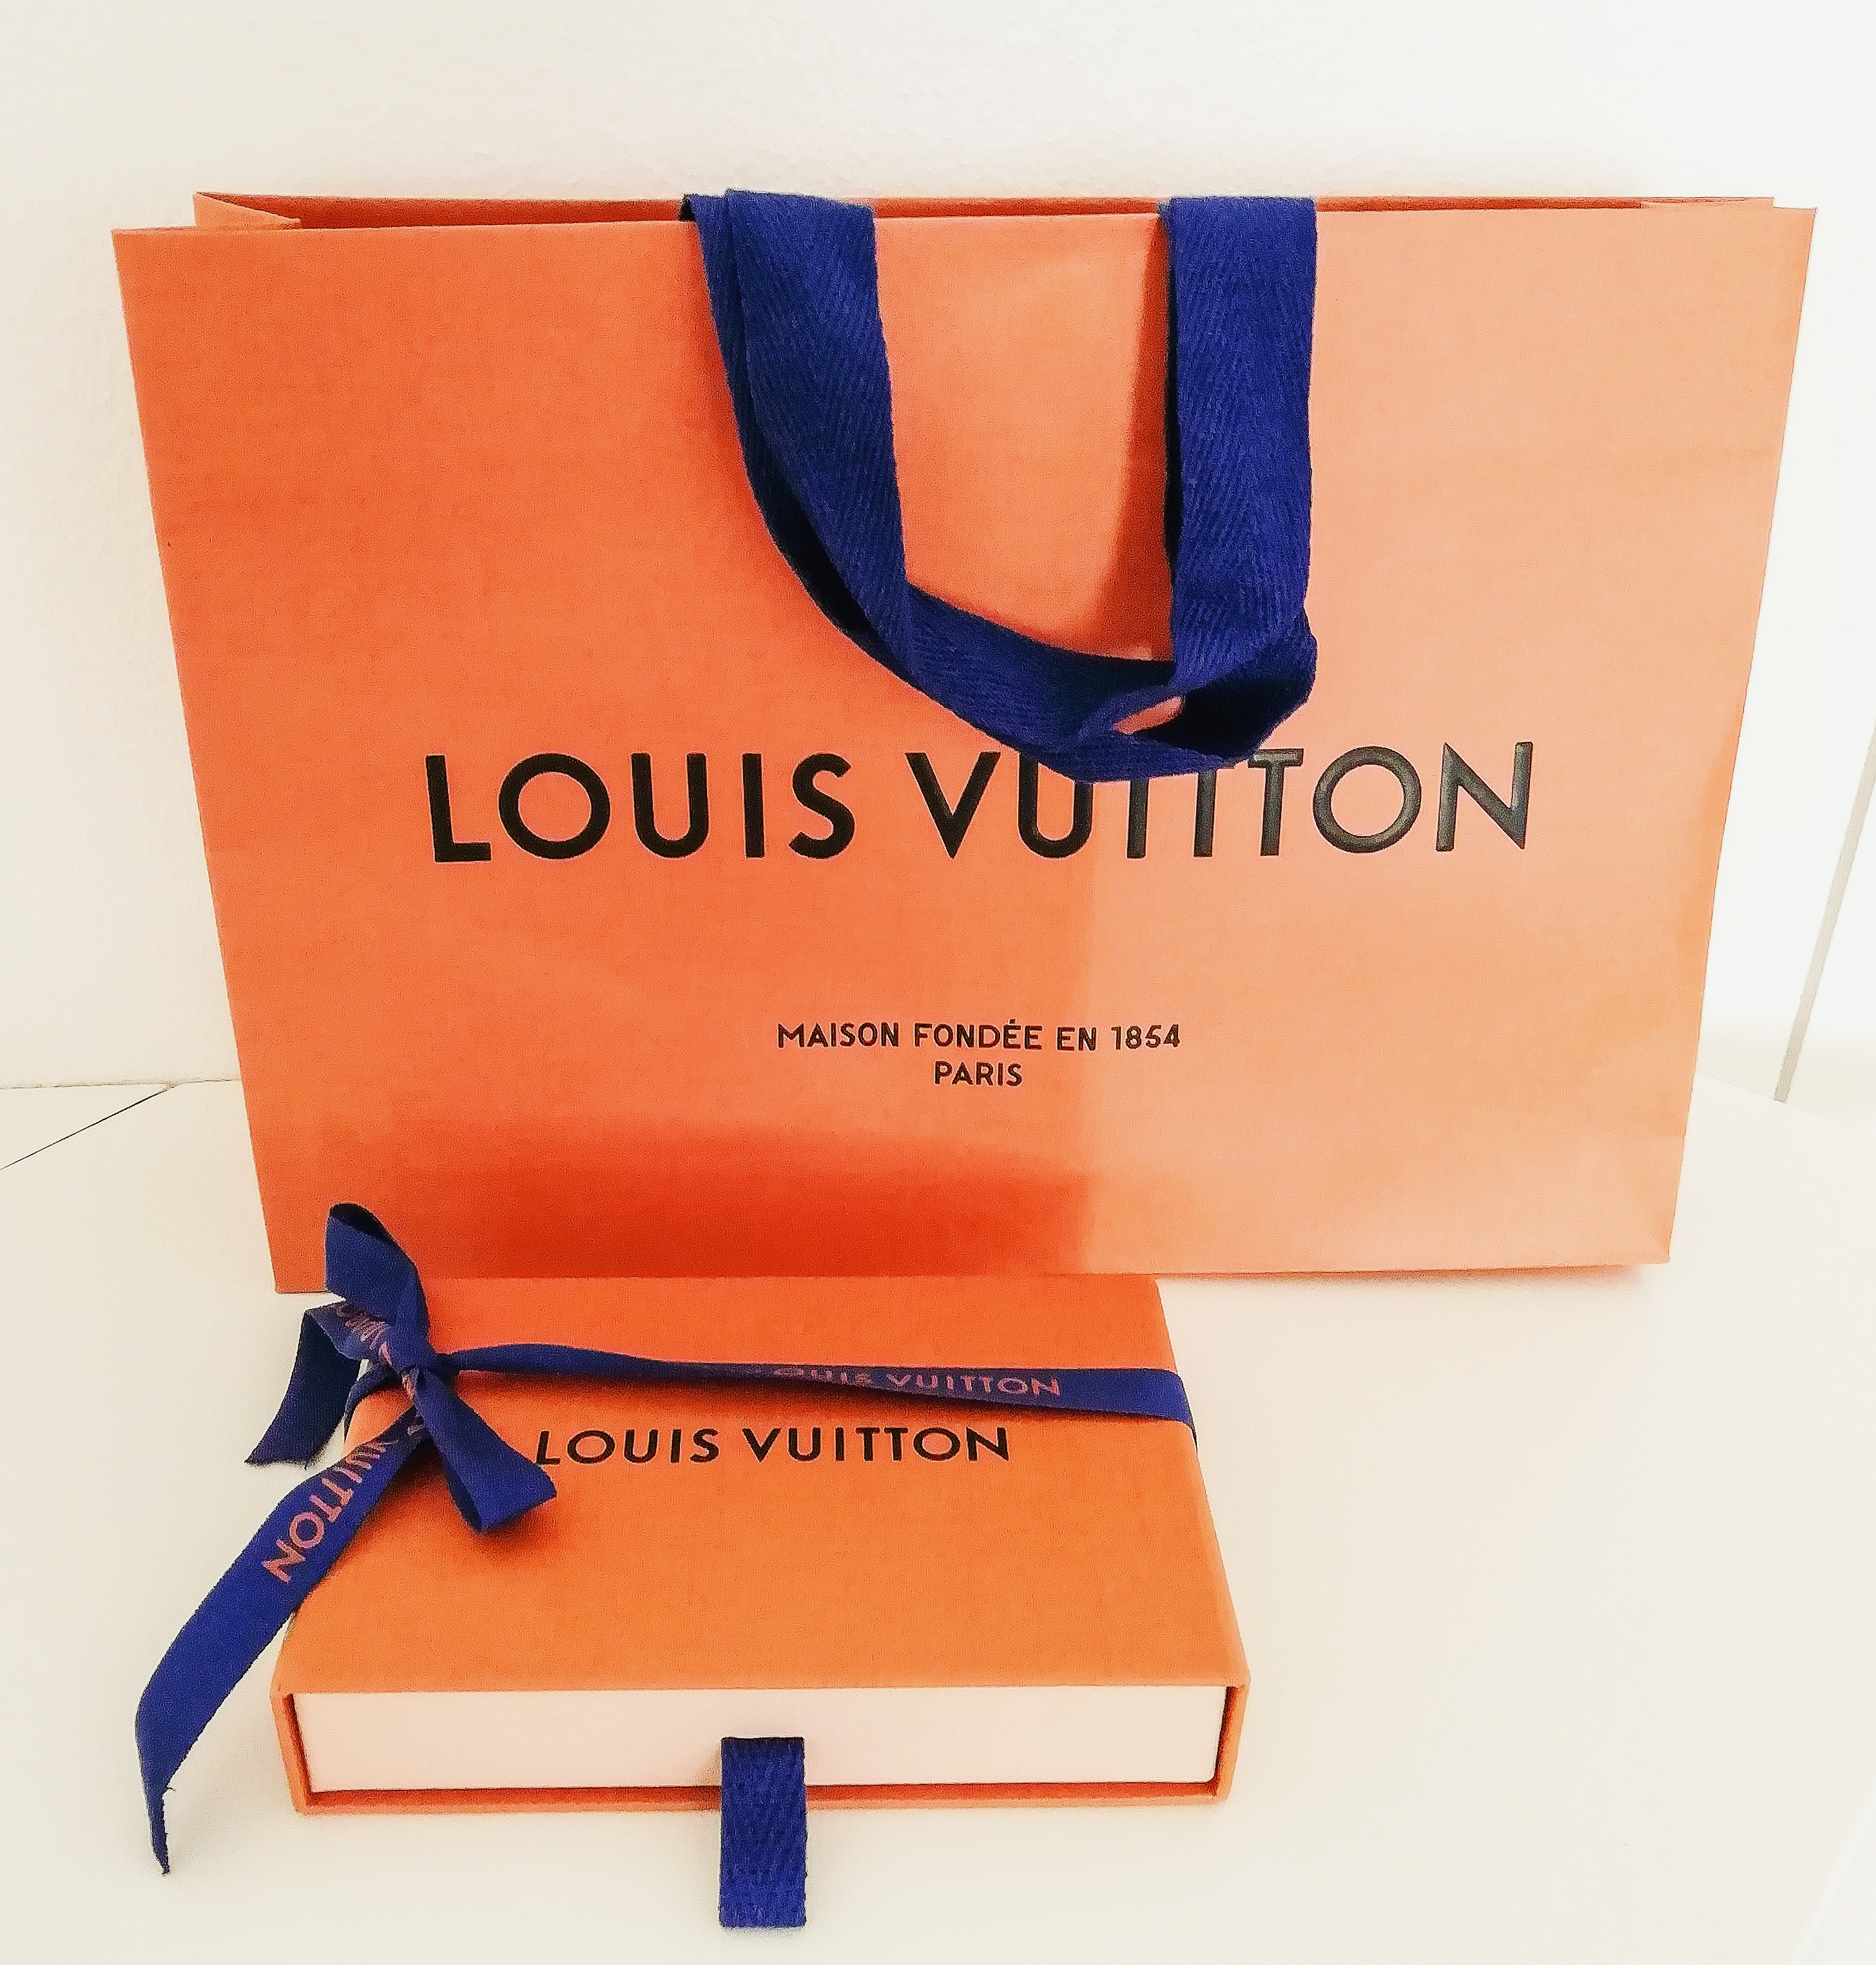 LOUIS VUITTON BIRTHDAY: Celebrate any birthday with a gorgeous set up like  this one! Contact us for your next event, we would love to help make it